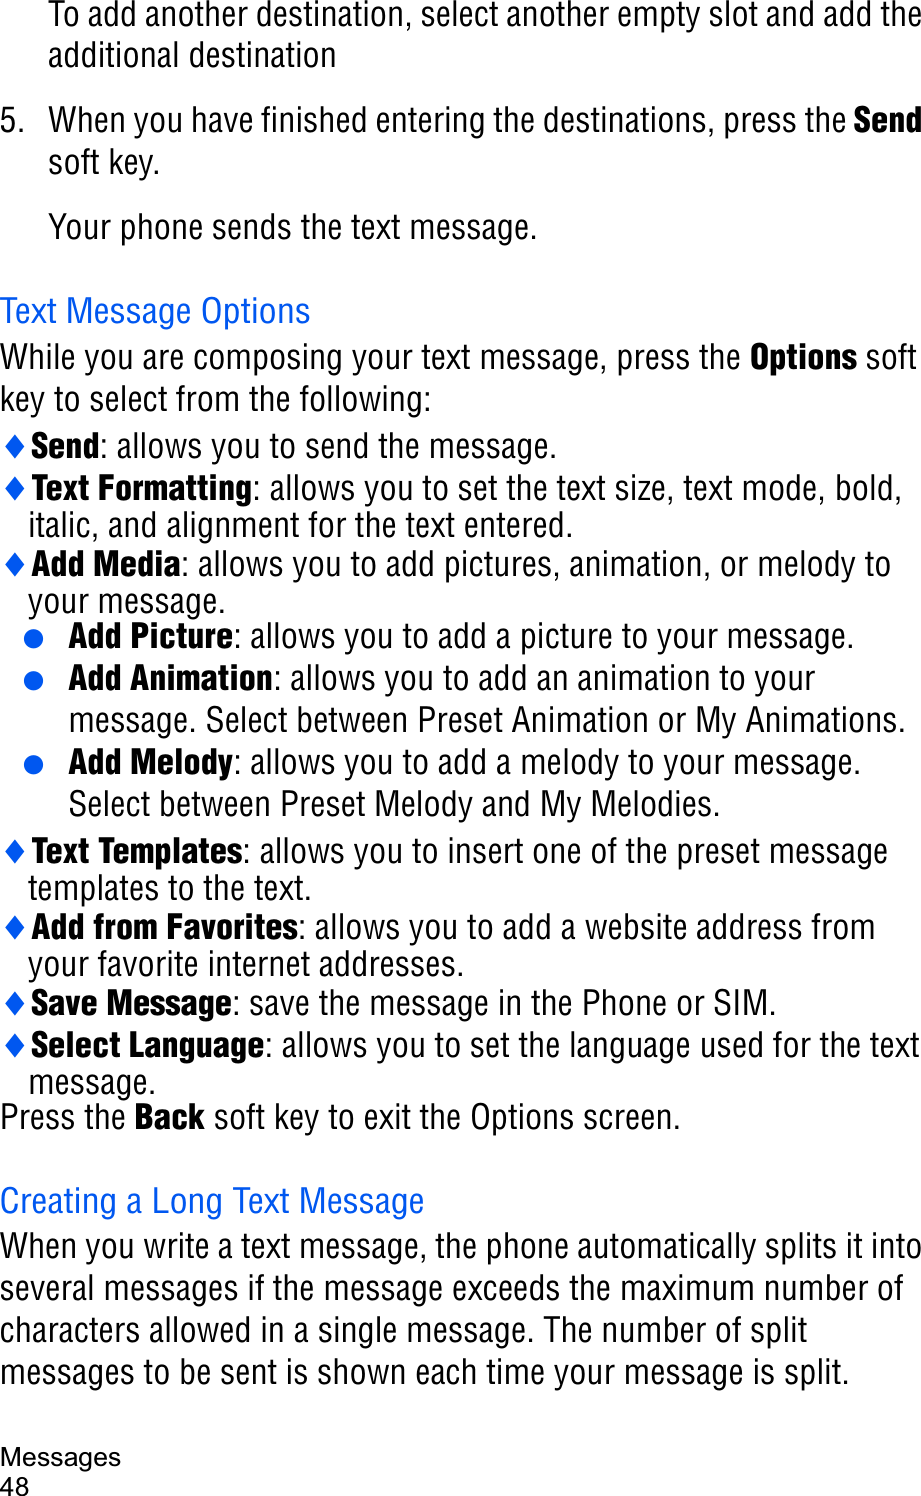 Messages48To add another destination, select another empty slot and add the additional destination5. When you have finished entering the destinations, press the Sendsoft key.Your phone sends the text message.Text Message OptionsWhile you are composing your text message, press the Options soft key to select from the following:iSend: allows you to send the message.iText Formatting: allows you to set the text size, text mode, bold, italic, and alignment for the text entered.iAdd Media: allows you to add pictures, animation, or melody to your message. ● Add Picture: allows you to add a picture to your message. ● Add Animation: allows you to add an animation to your message. Select between Preset Animation or My Animations. ● Add Melody: allows you to add a melody to your message. Select between Preset Melody and My Melodies.iText Templates: allows you to insert one of the preset message templates to the text.iAdd from Favorites: allows you to add a website address from your favorite internet addresses.iSave Message: save the message in the Phone or SIM.iSelect Language: allows you to set the language used for the text message.Press the Back soft key to exit the Options screen.Creating a Long Text MessageWhen you write a text message, the phone automatically splits it into several messages if the message exceeds the maximum number of characters allowed in a single message. The number of split messages to be sent is shown each time your message is split. 